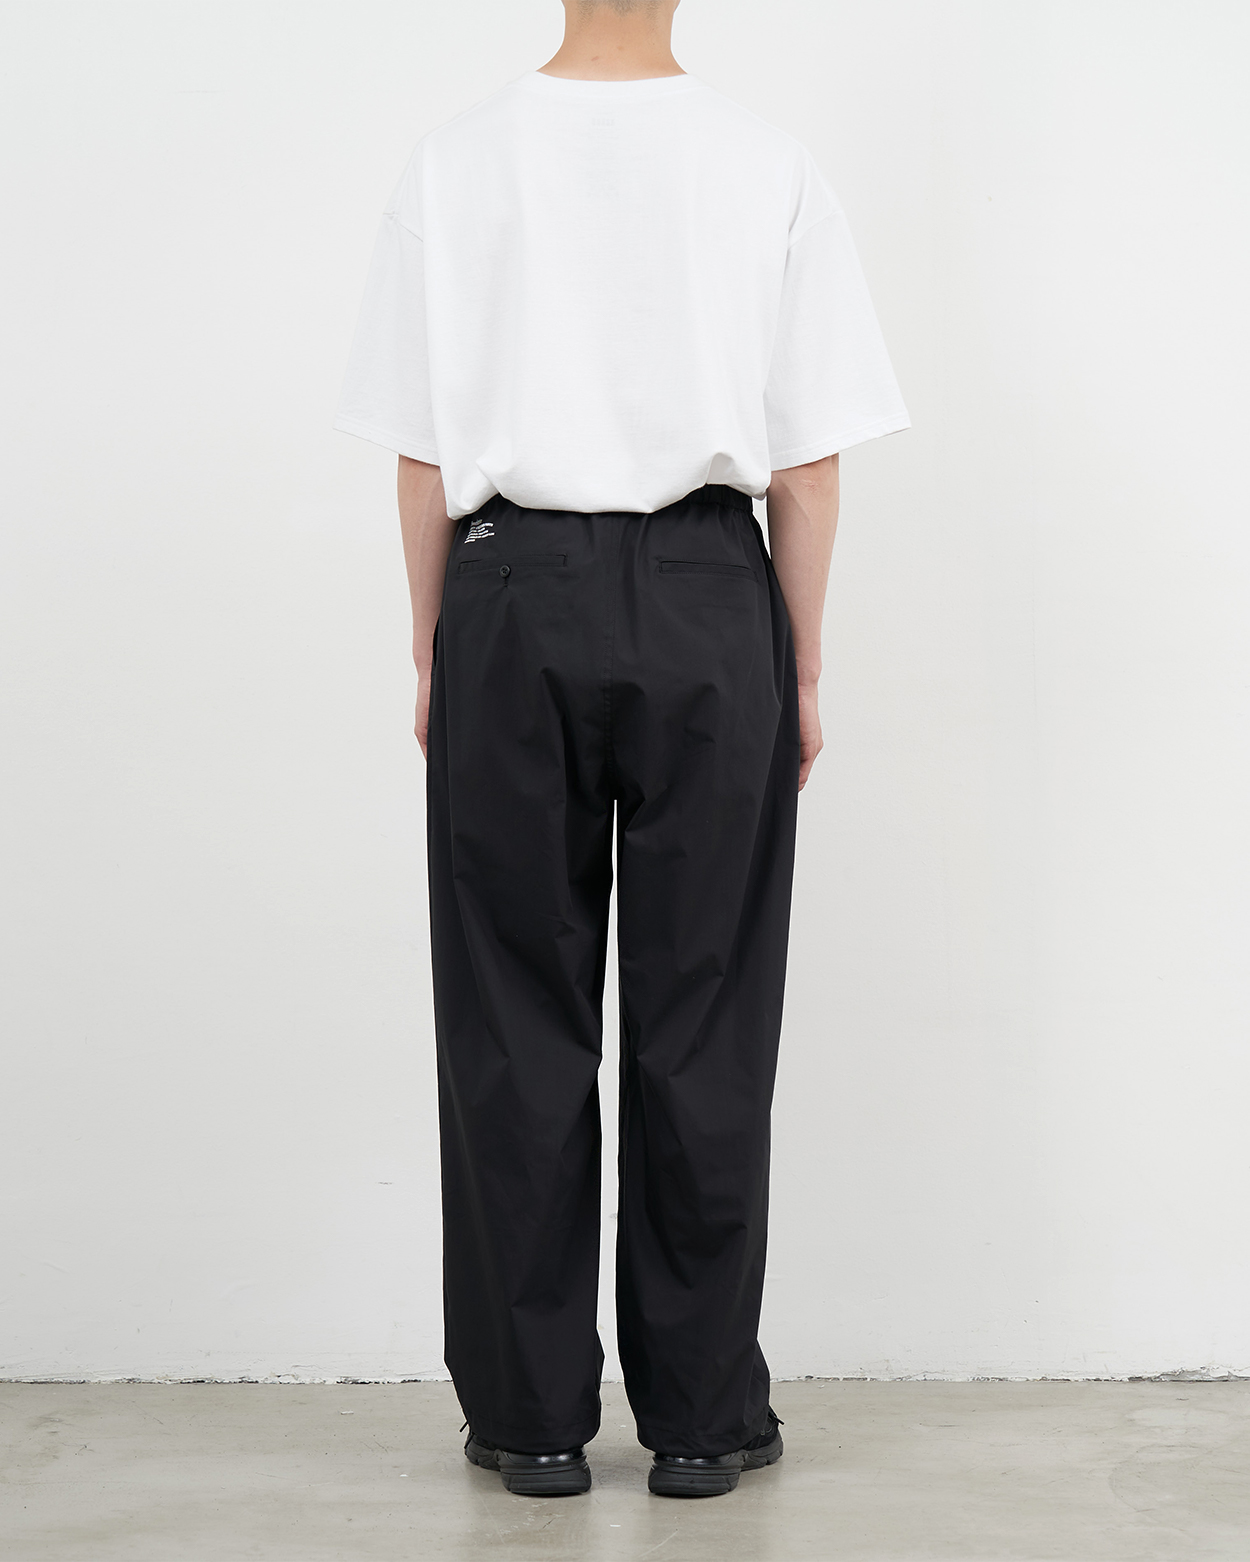 Tronica » FreshService _ UTILITY STRETCH OVER PANTS